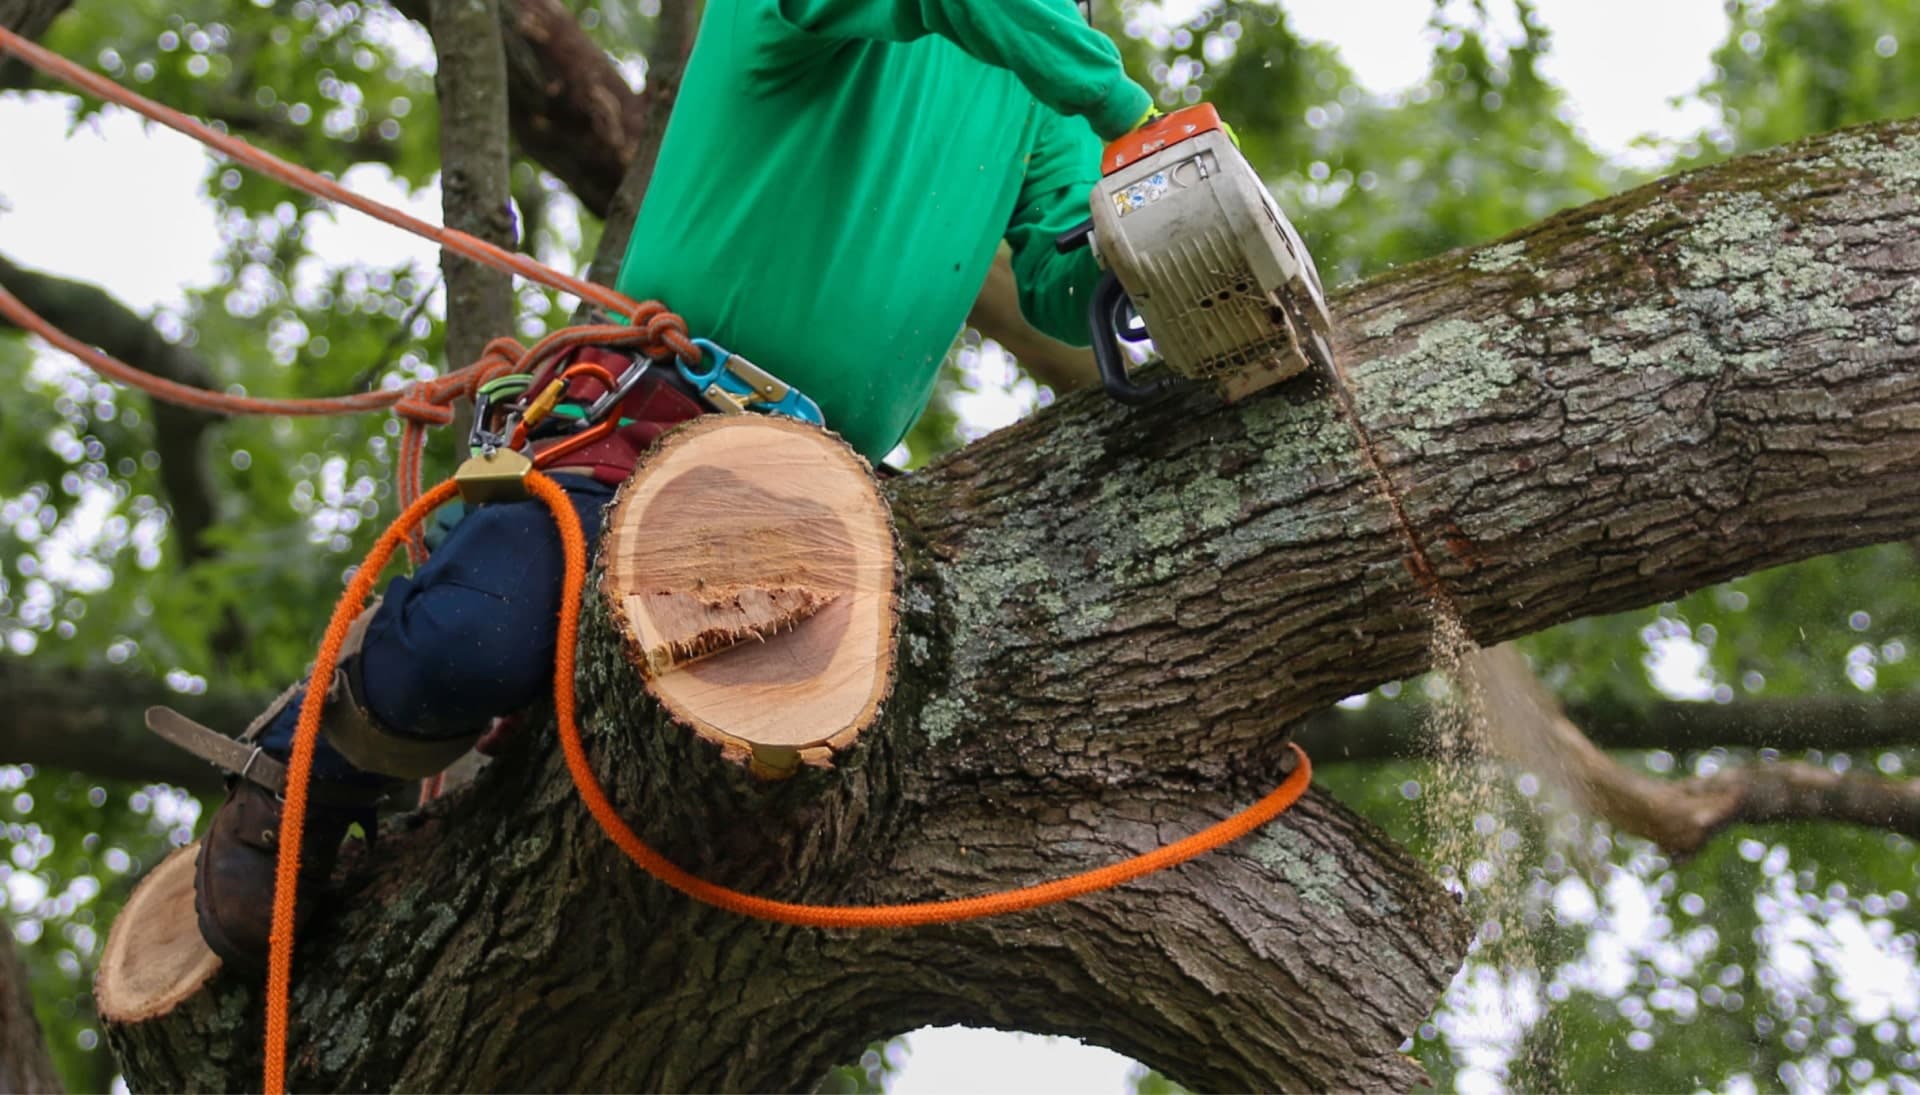 Shed your worries away with best tree removal in Cleveland